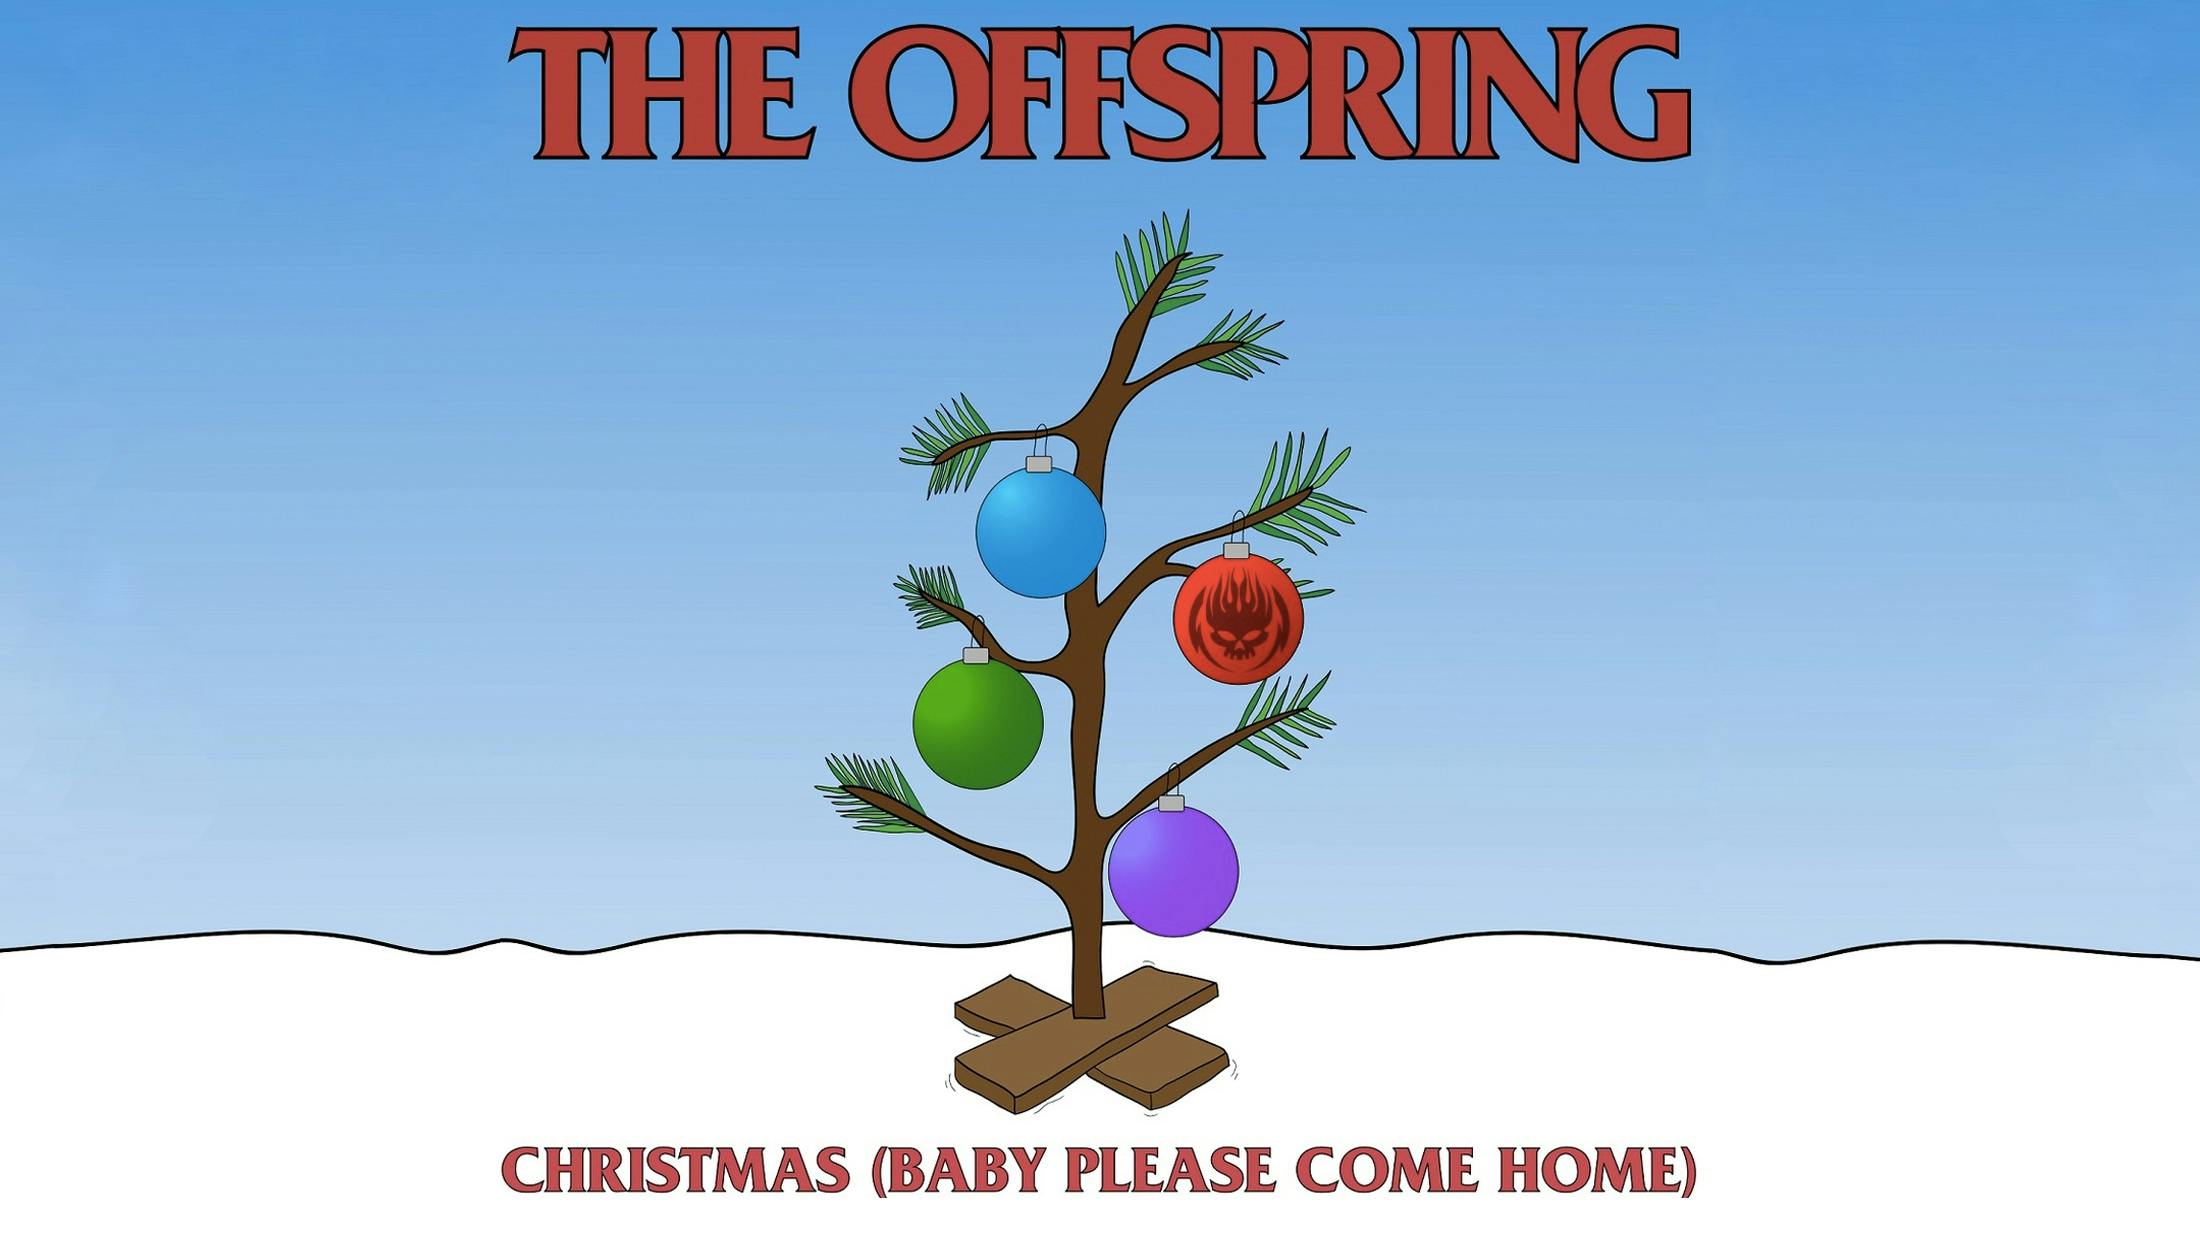 Get Festive! The Offspring Have Released A Christmas Song